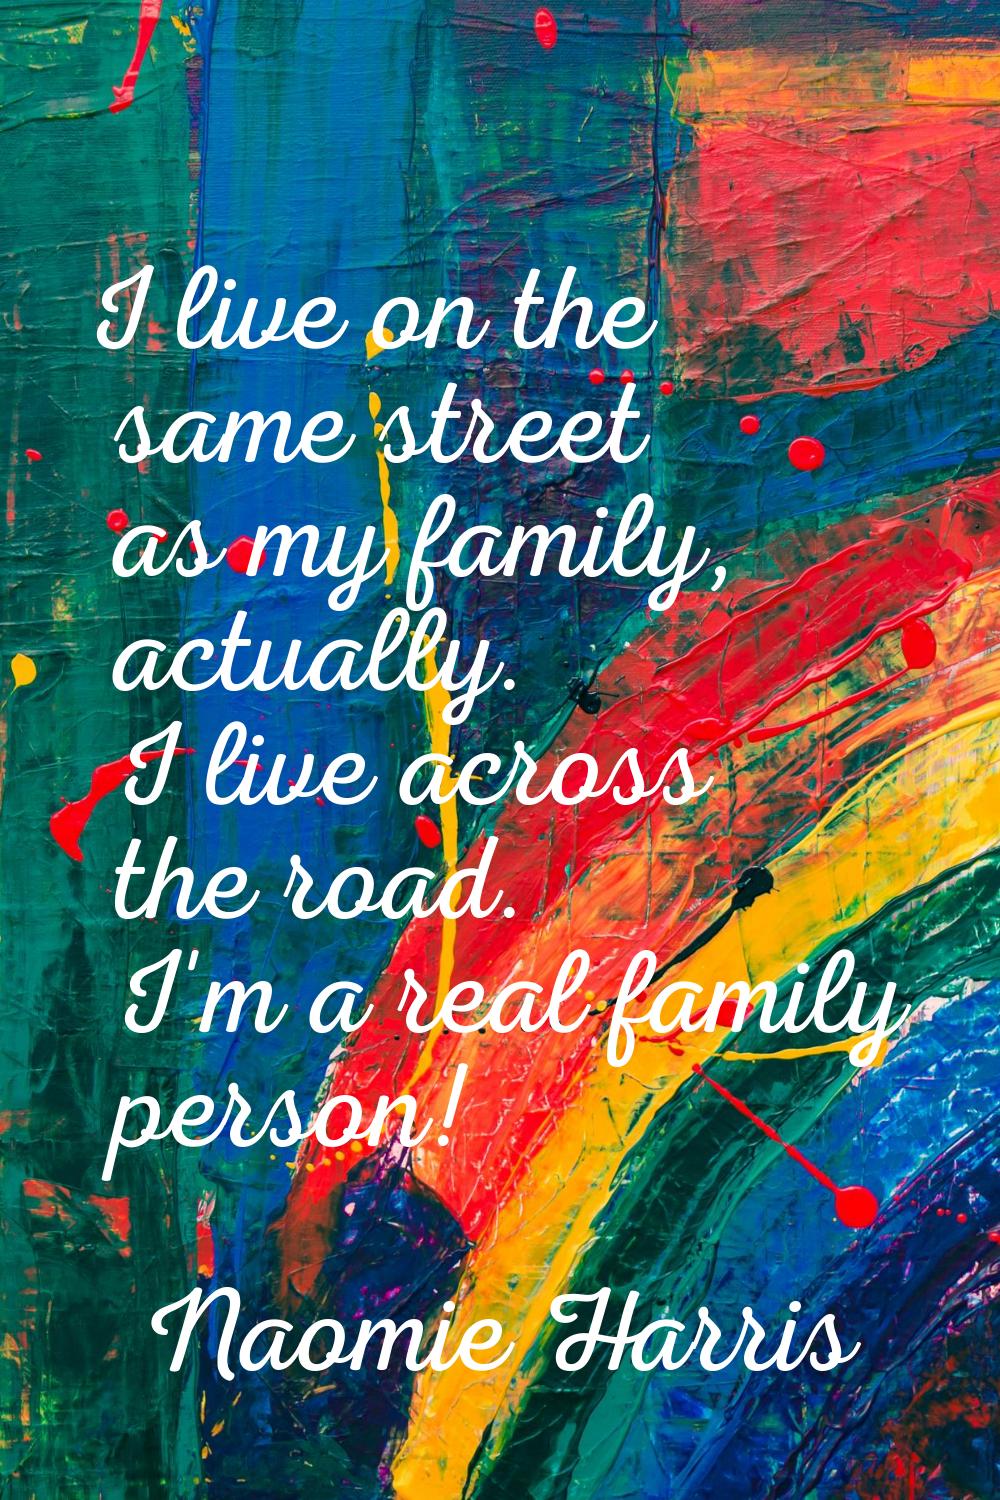 I live on the same street as my family, actually. I live across the road. I'm a real family person!